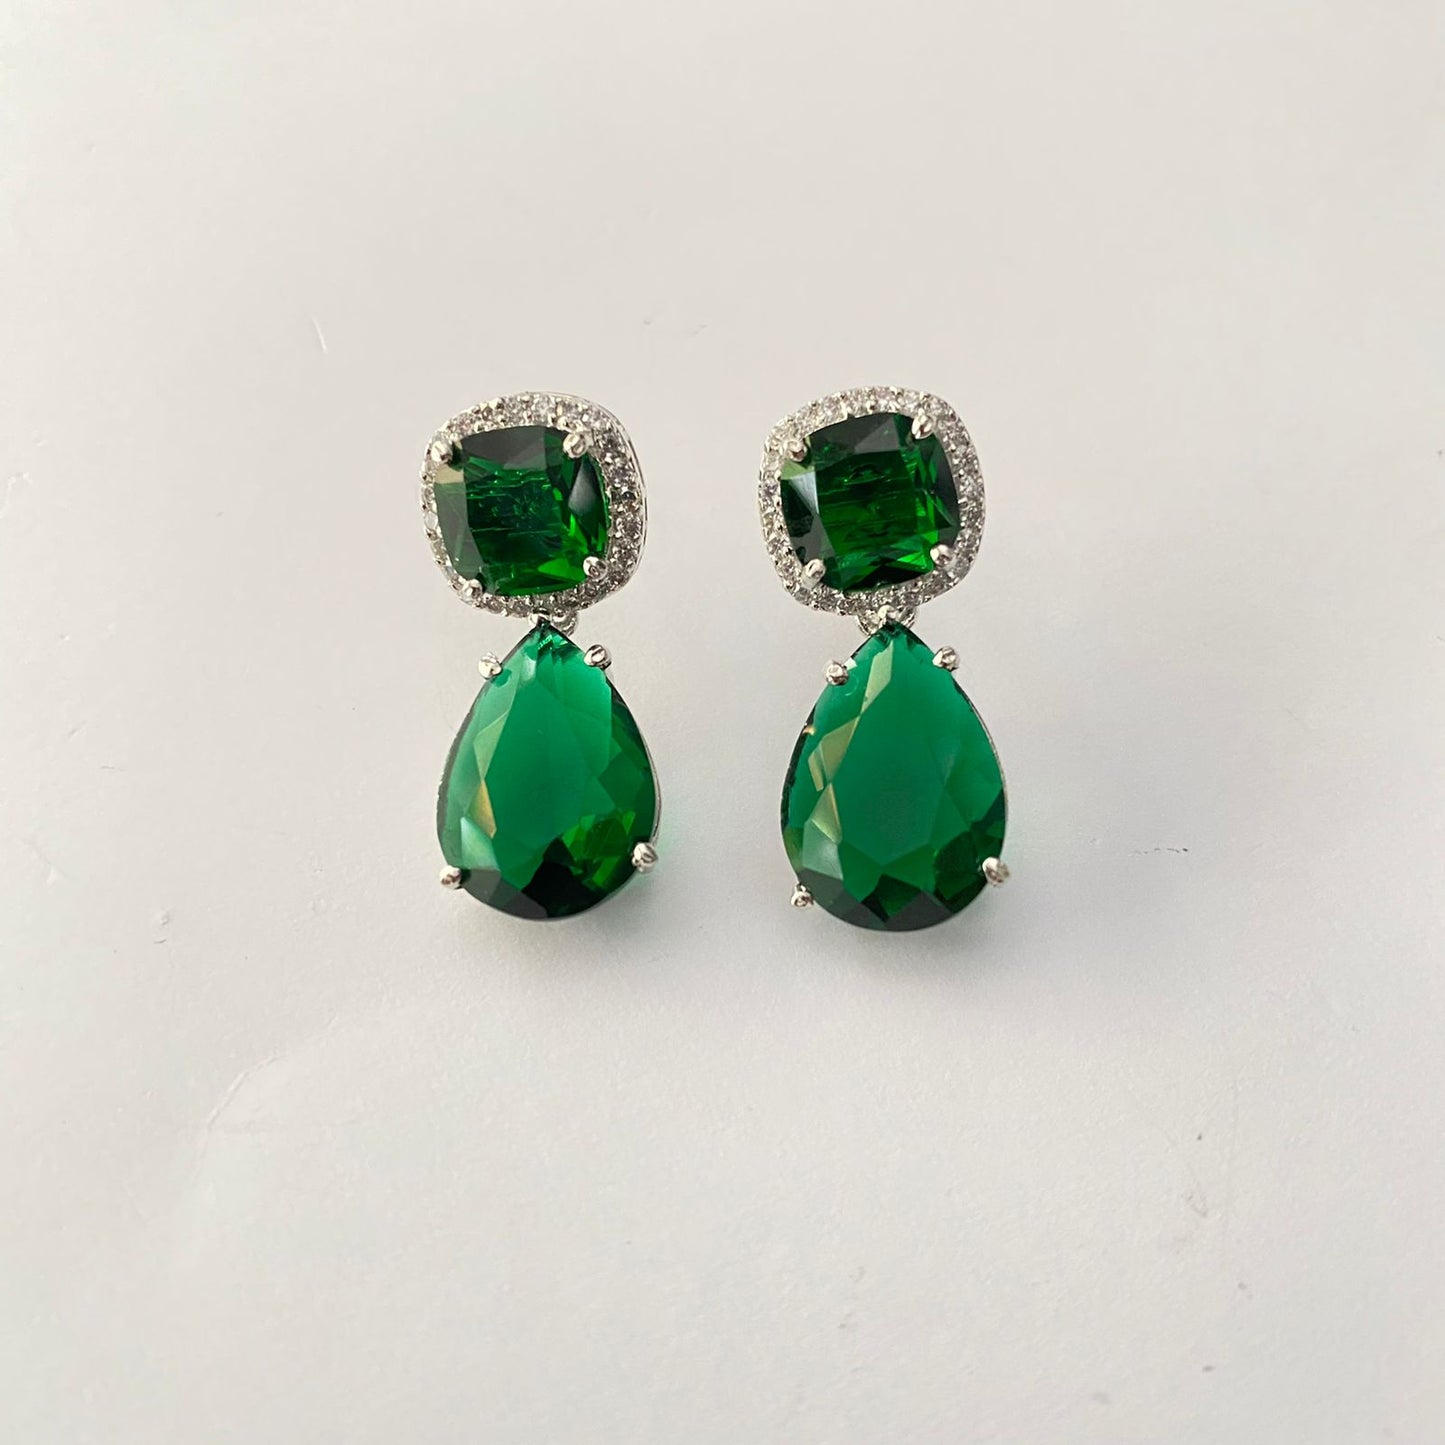 Small Emerald Ad Stone Silver Plated  Earring With Back Clip